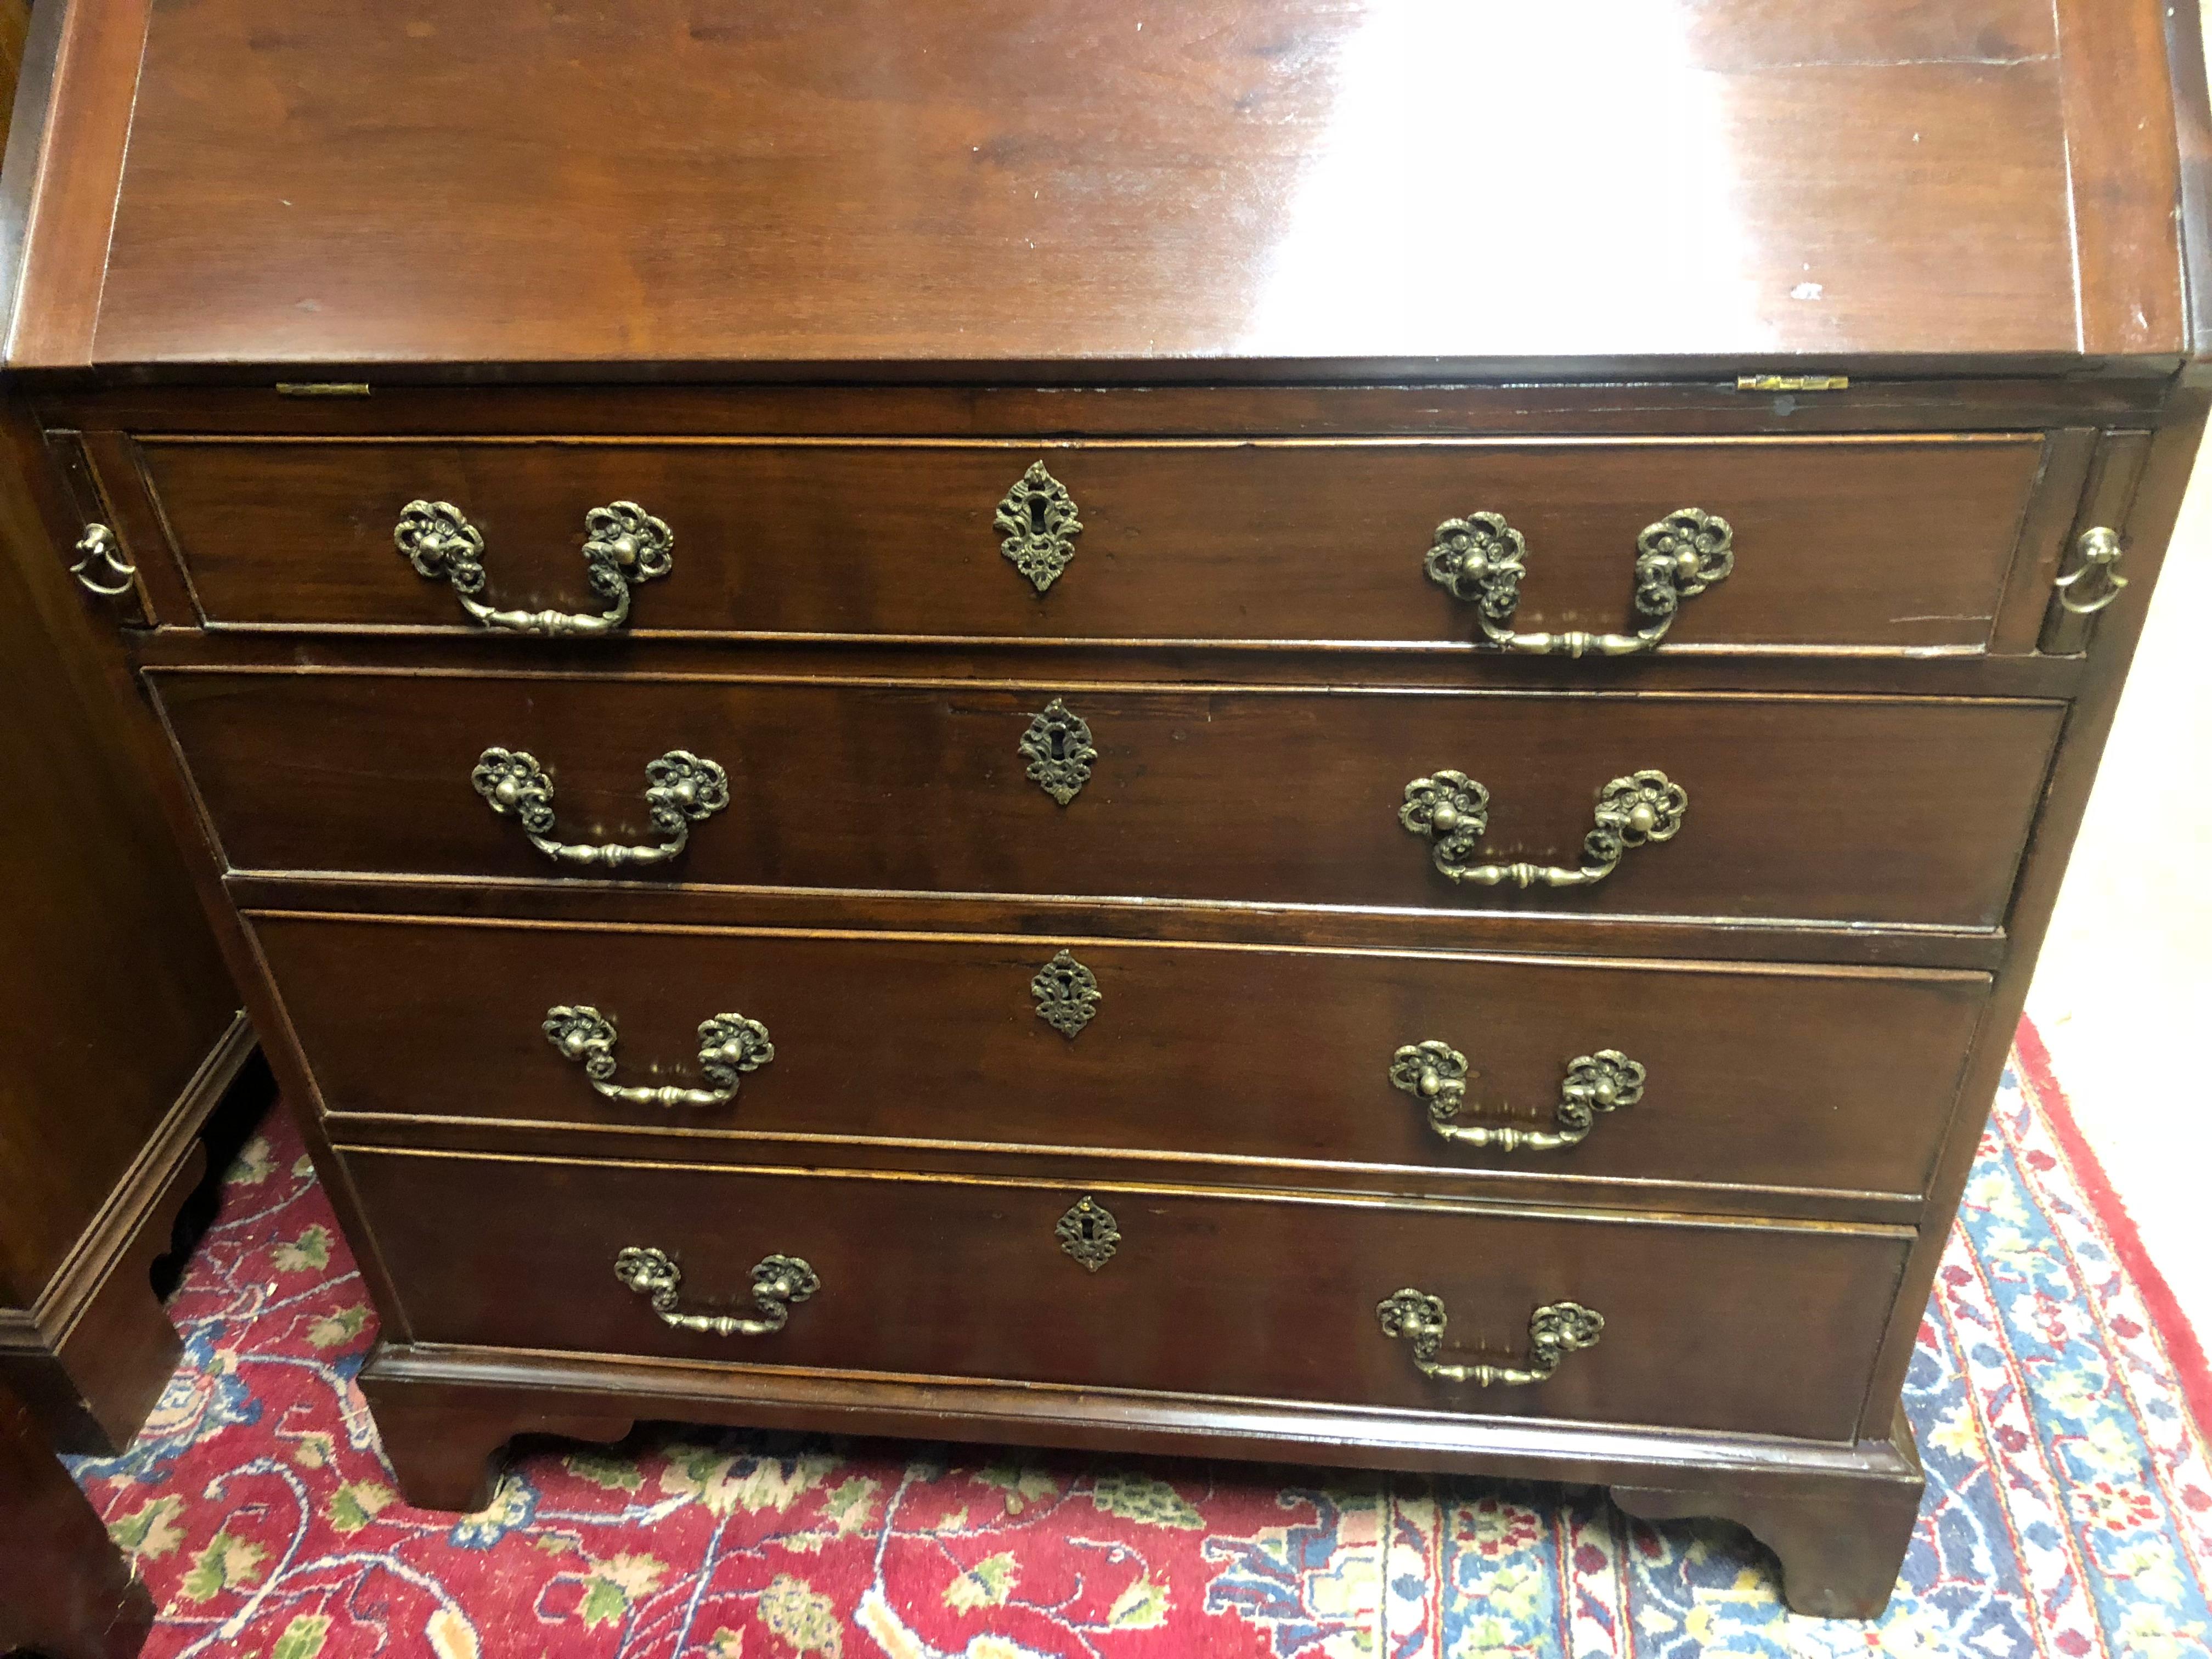 Period English Chippendale Bureau bookcase with secretary interior. Only 36